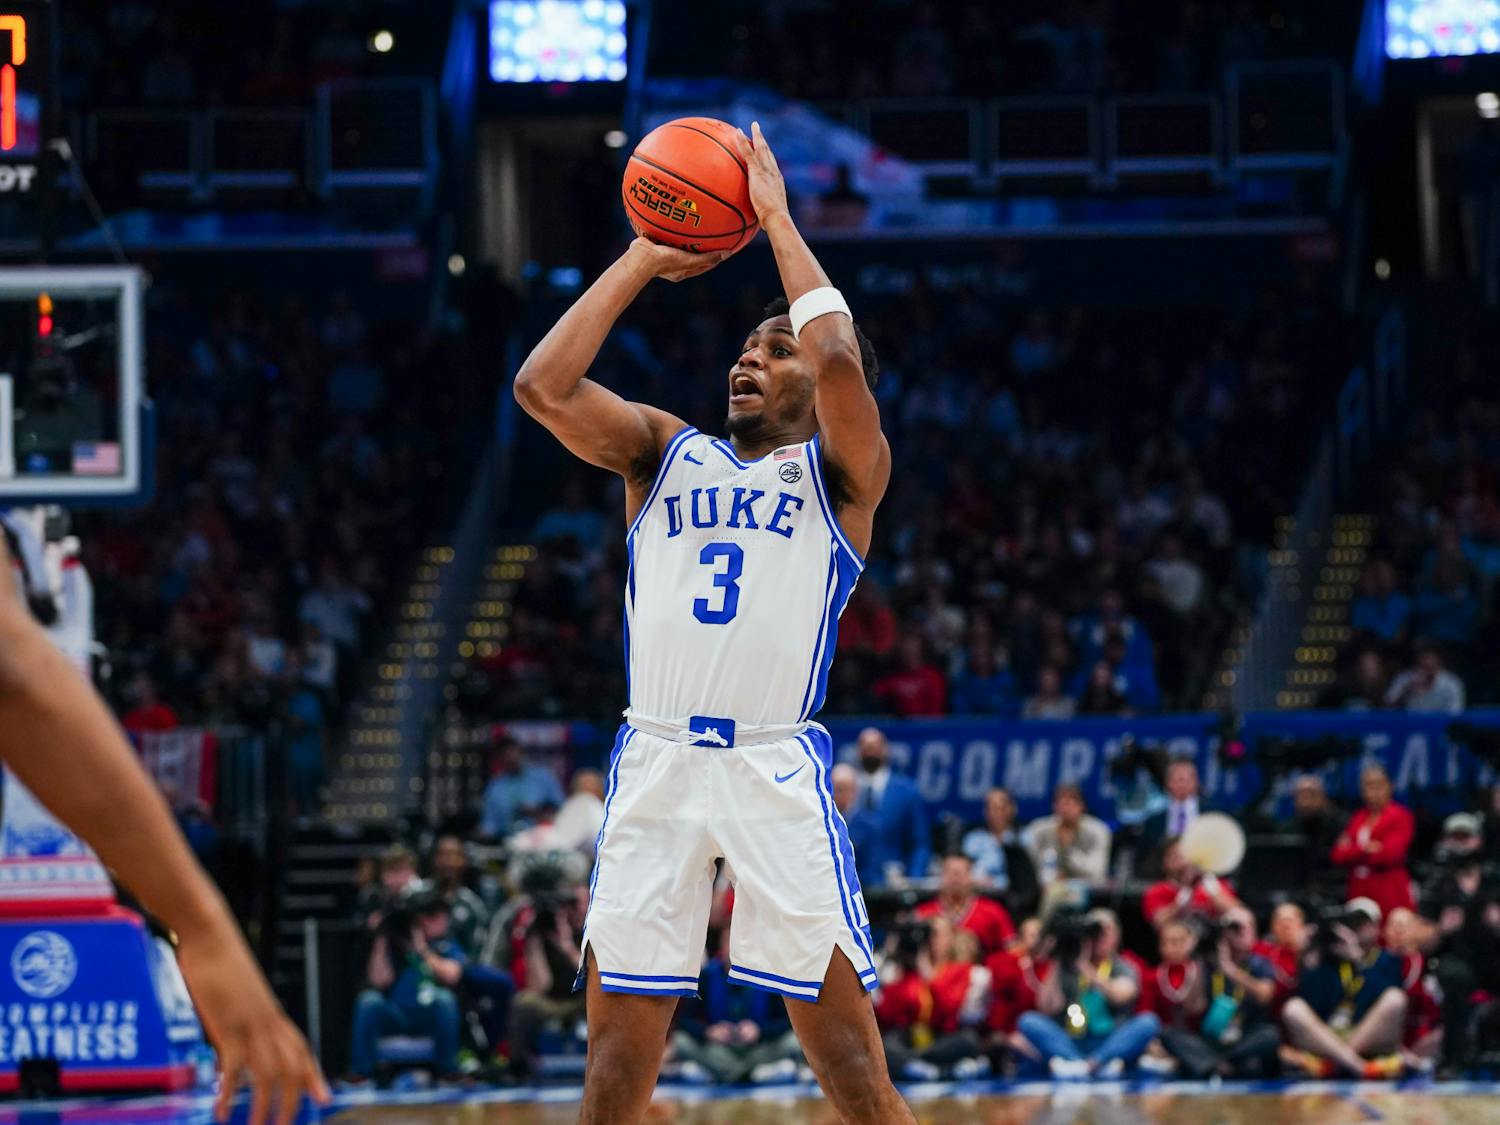 Duke will enter the NCAA tournament as the No. 4 seed in the South region. 